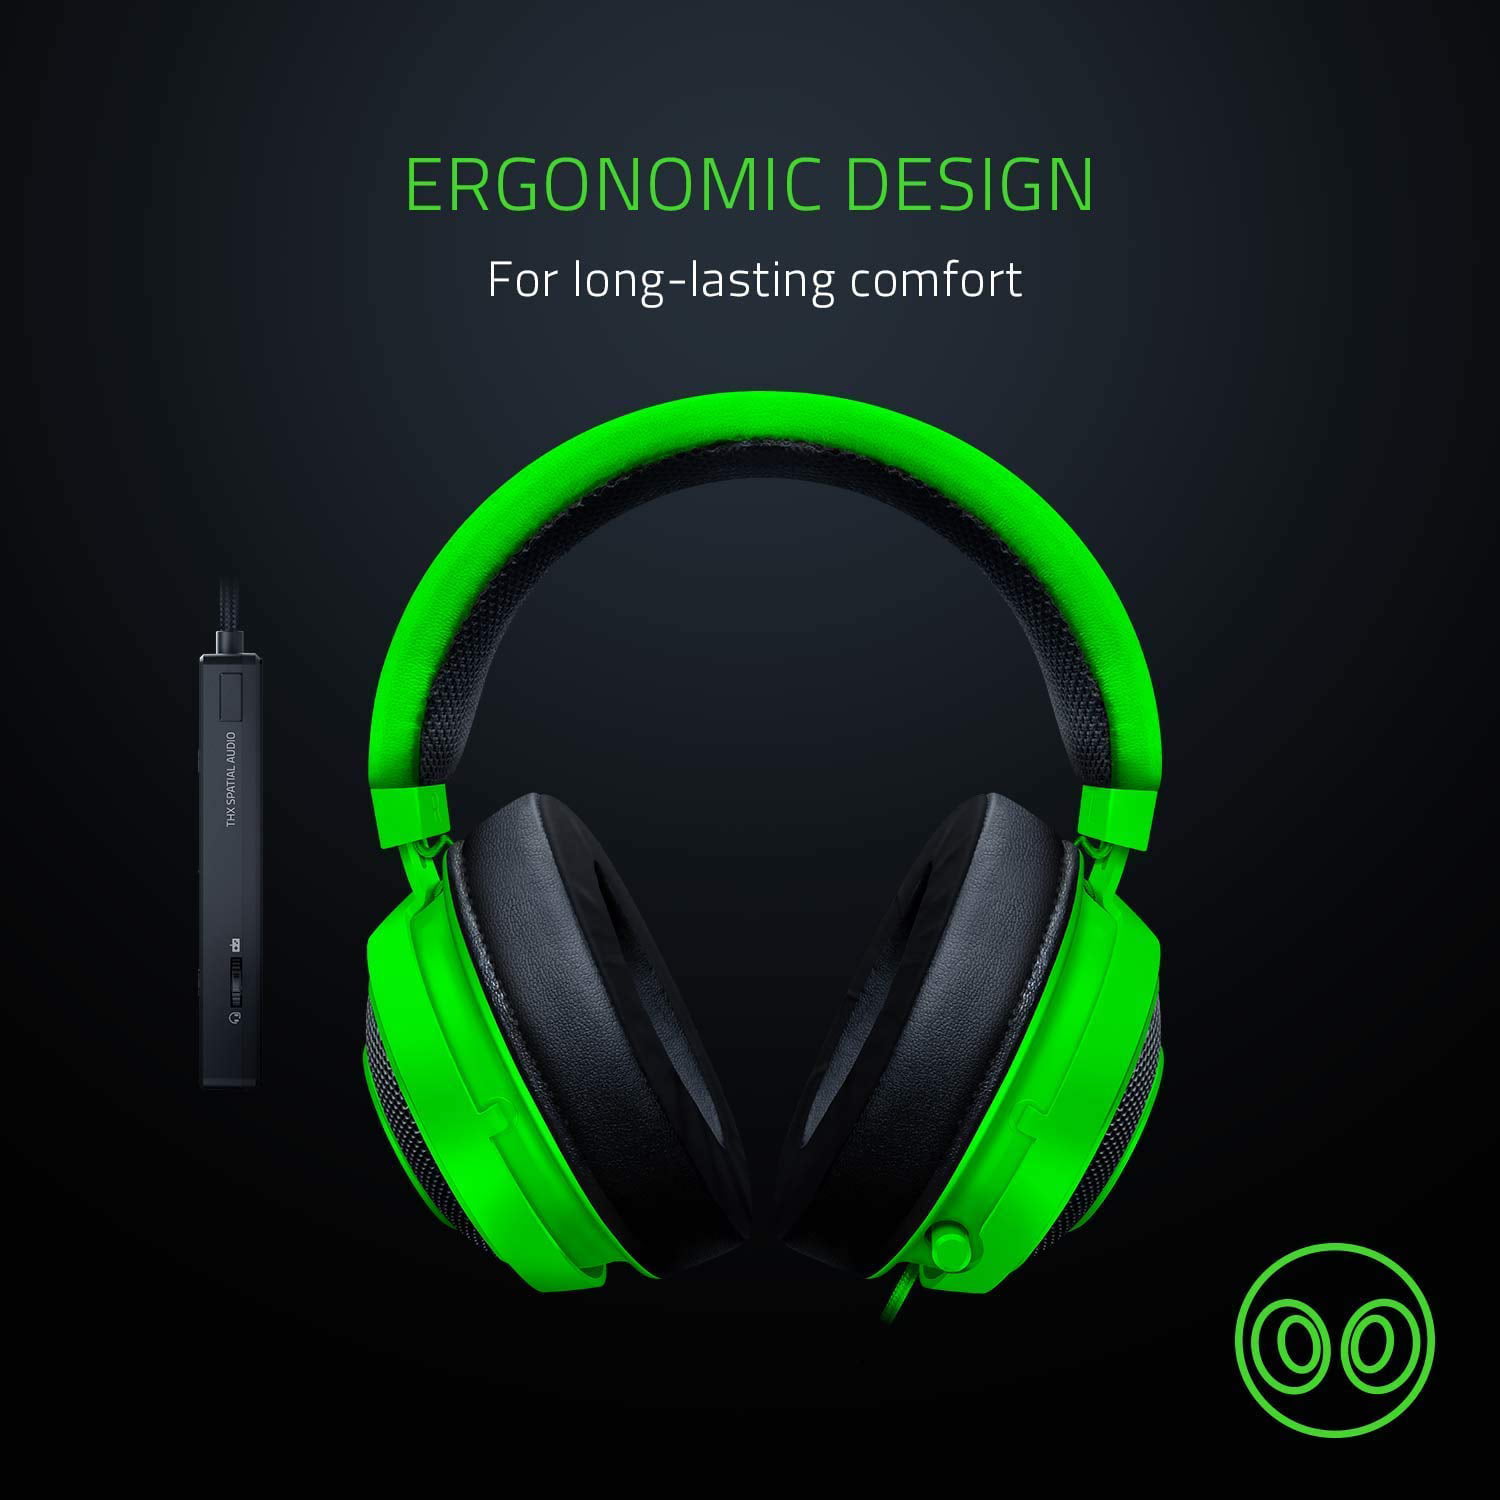 overloop helikopter Meer dan wat dan ook Razer Kraken Tournament Edition: THX Spatial Audio - Full Audio Control -  Cooling Gel-Infused Ear Cushions - Gaming Headset Works with PC, PS4, Xbox  One, Switch, Mobile Devices - Green - Walmart.com